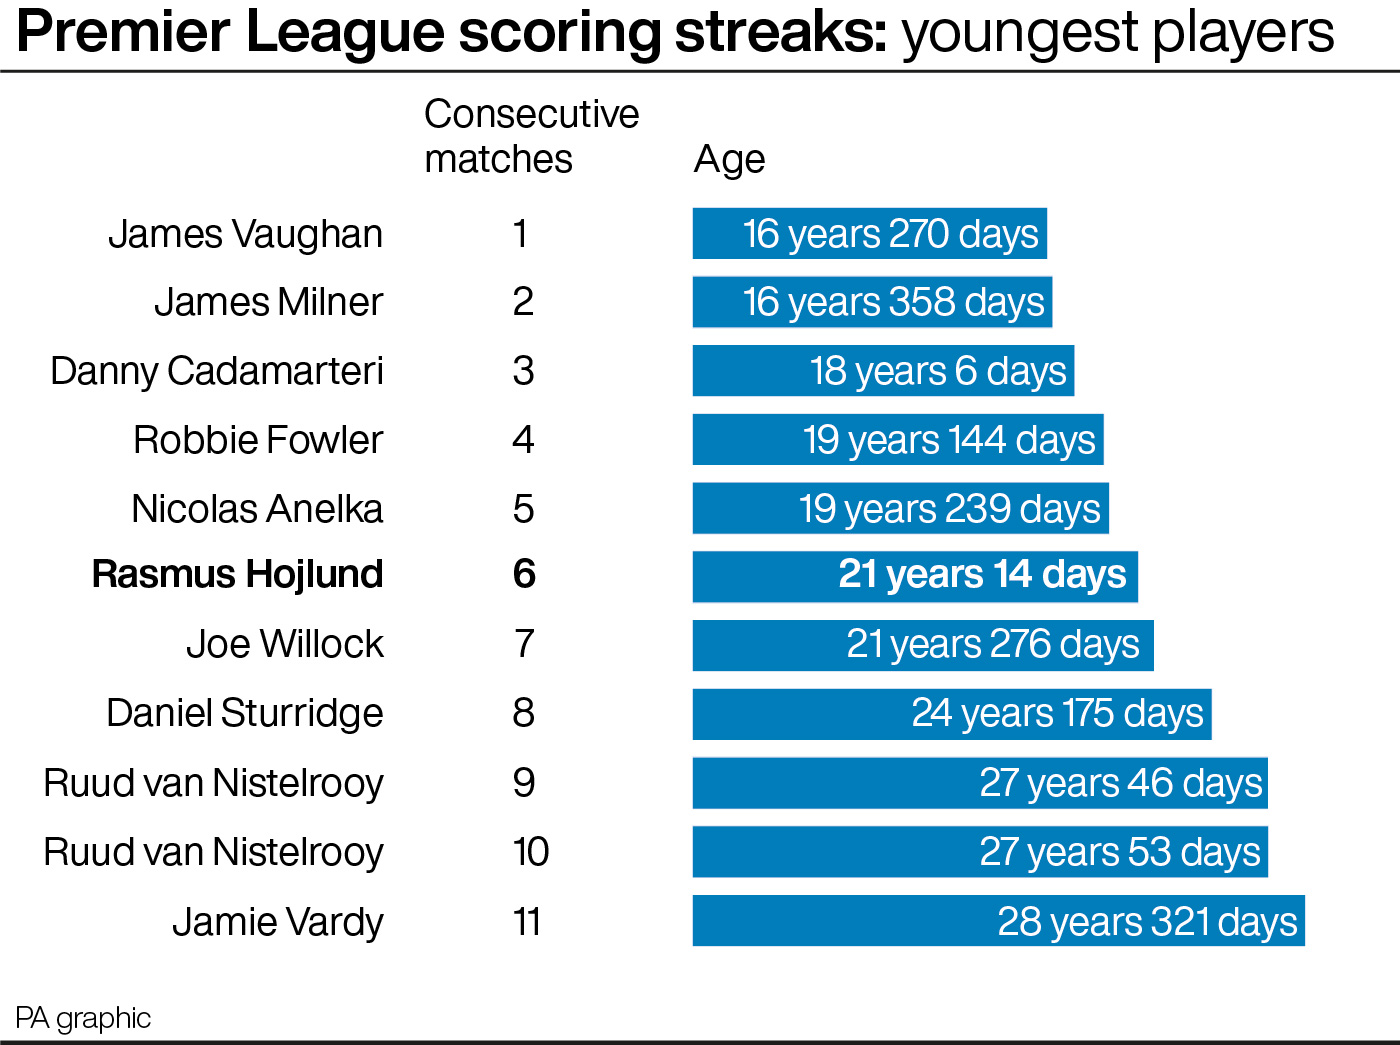 Premier League scoring streaks: youngest players (graphic)